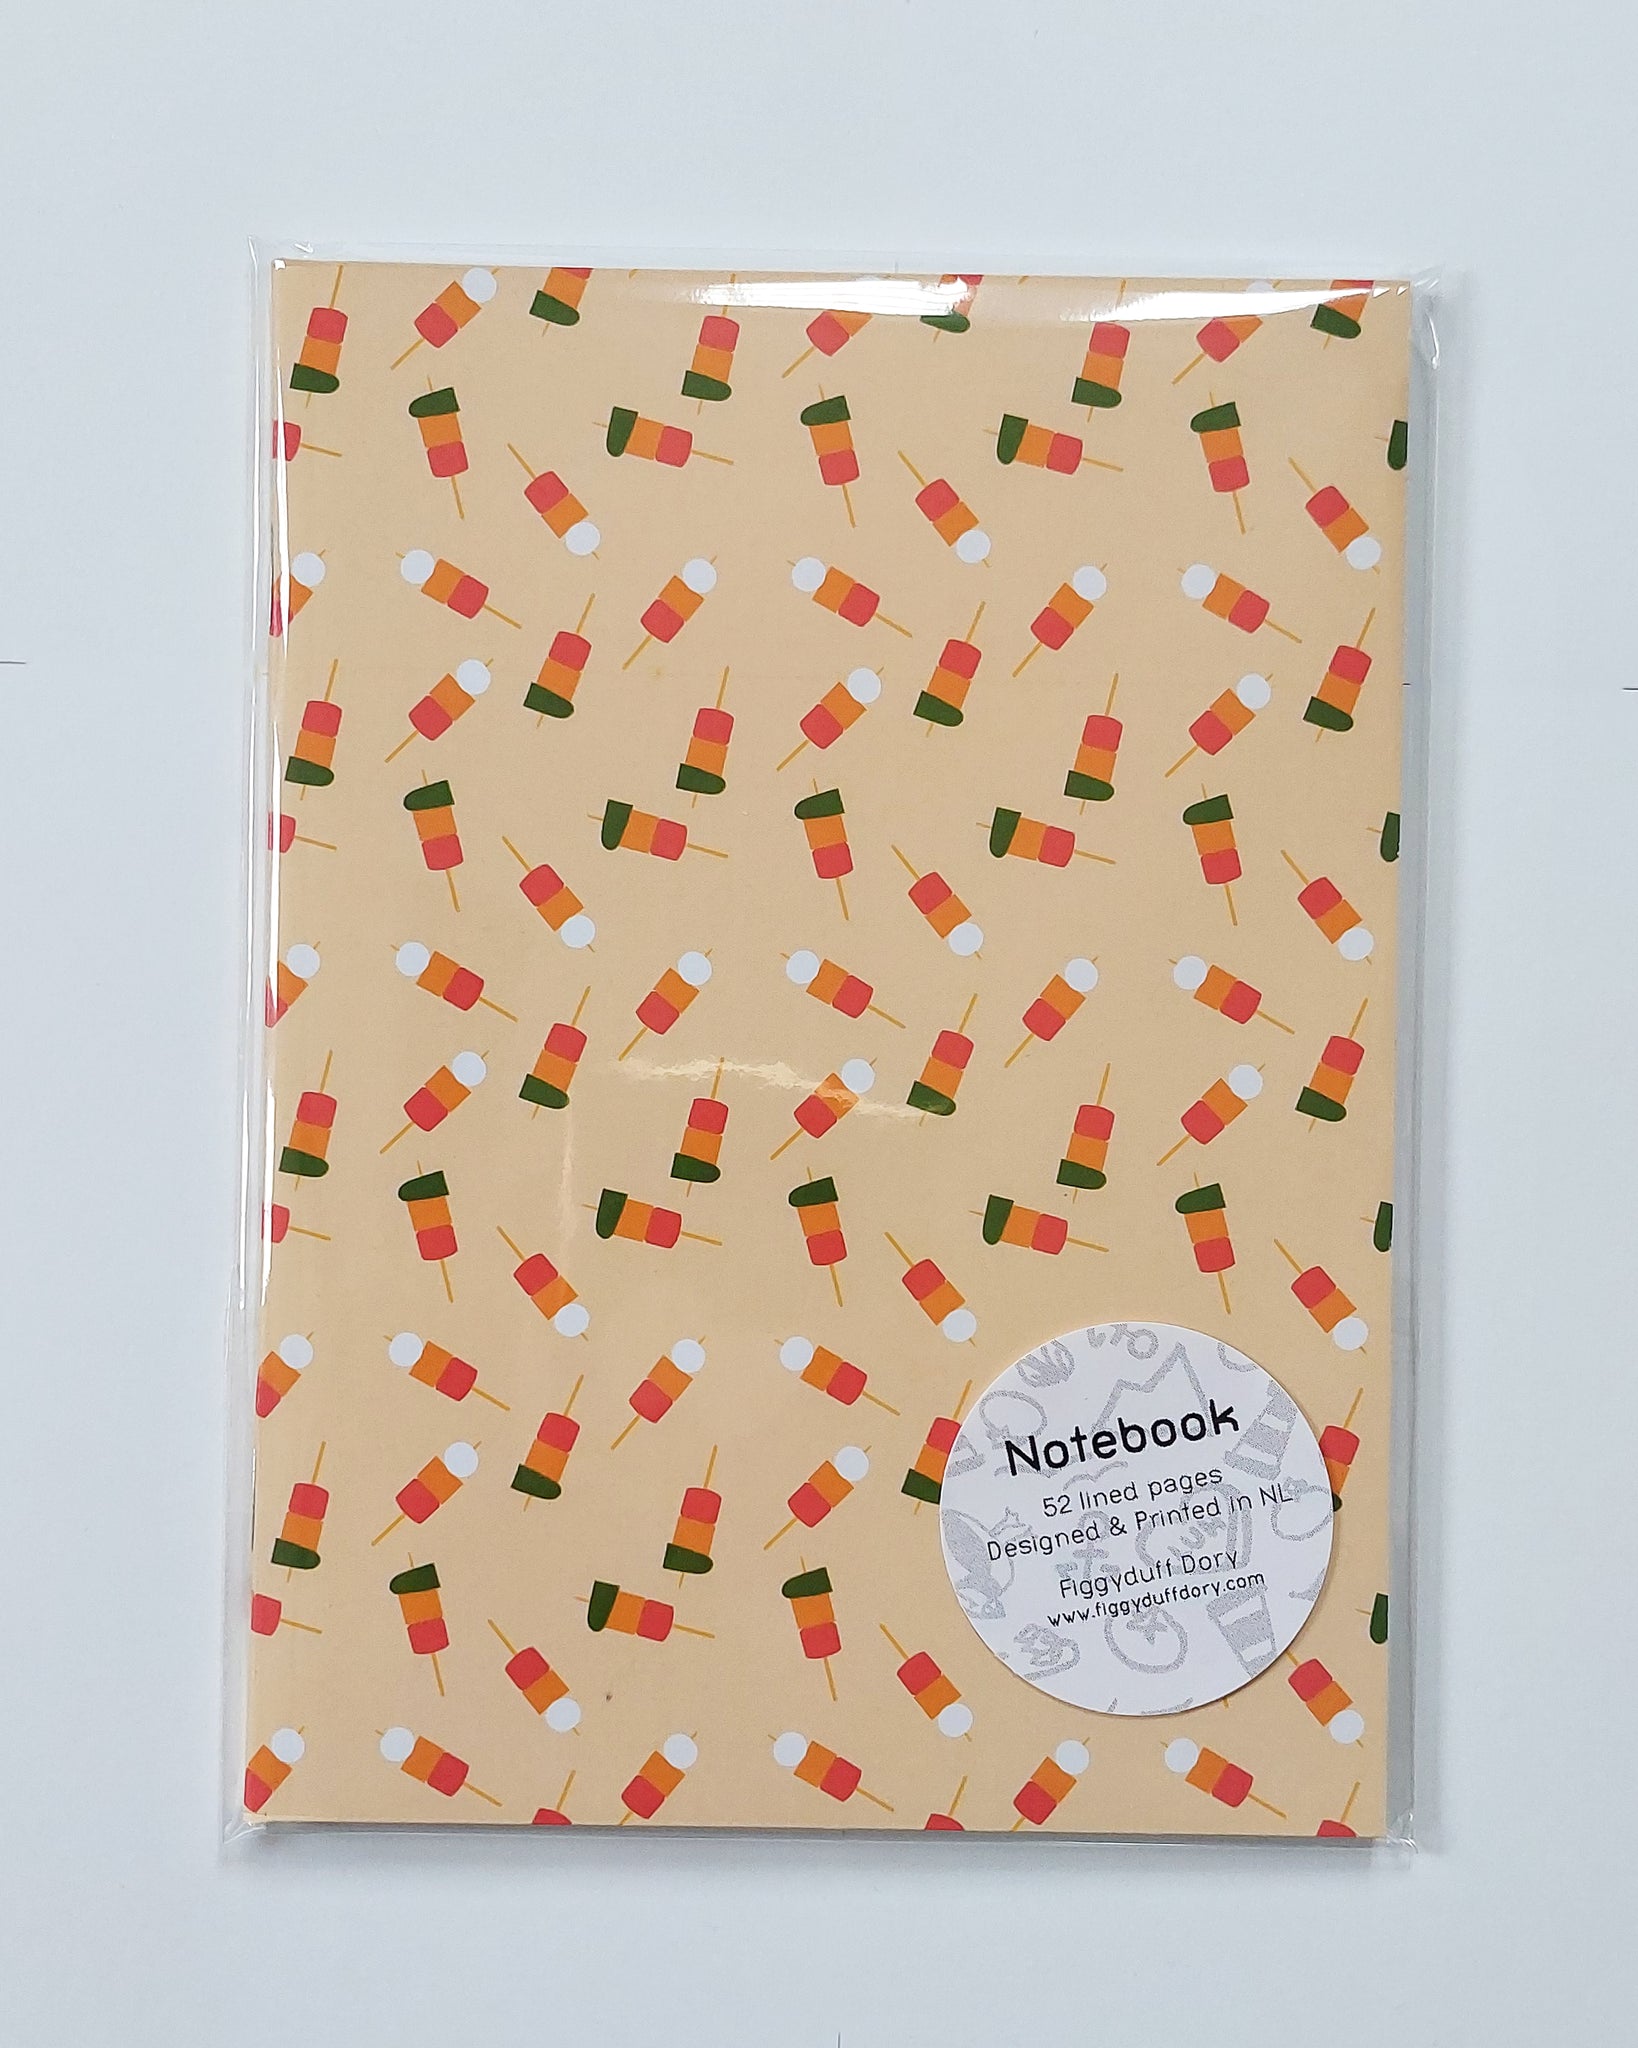 Hors D'Oeuvres "baydervs" Lined Notebook